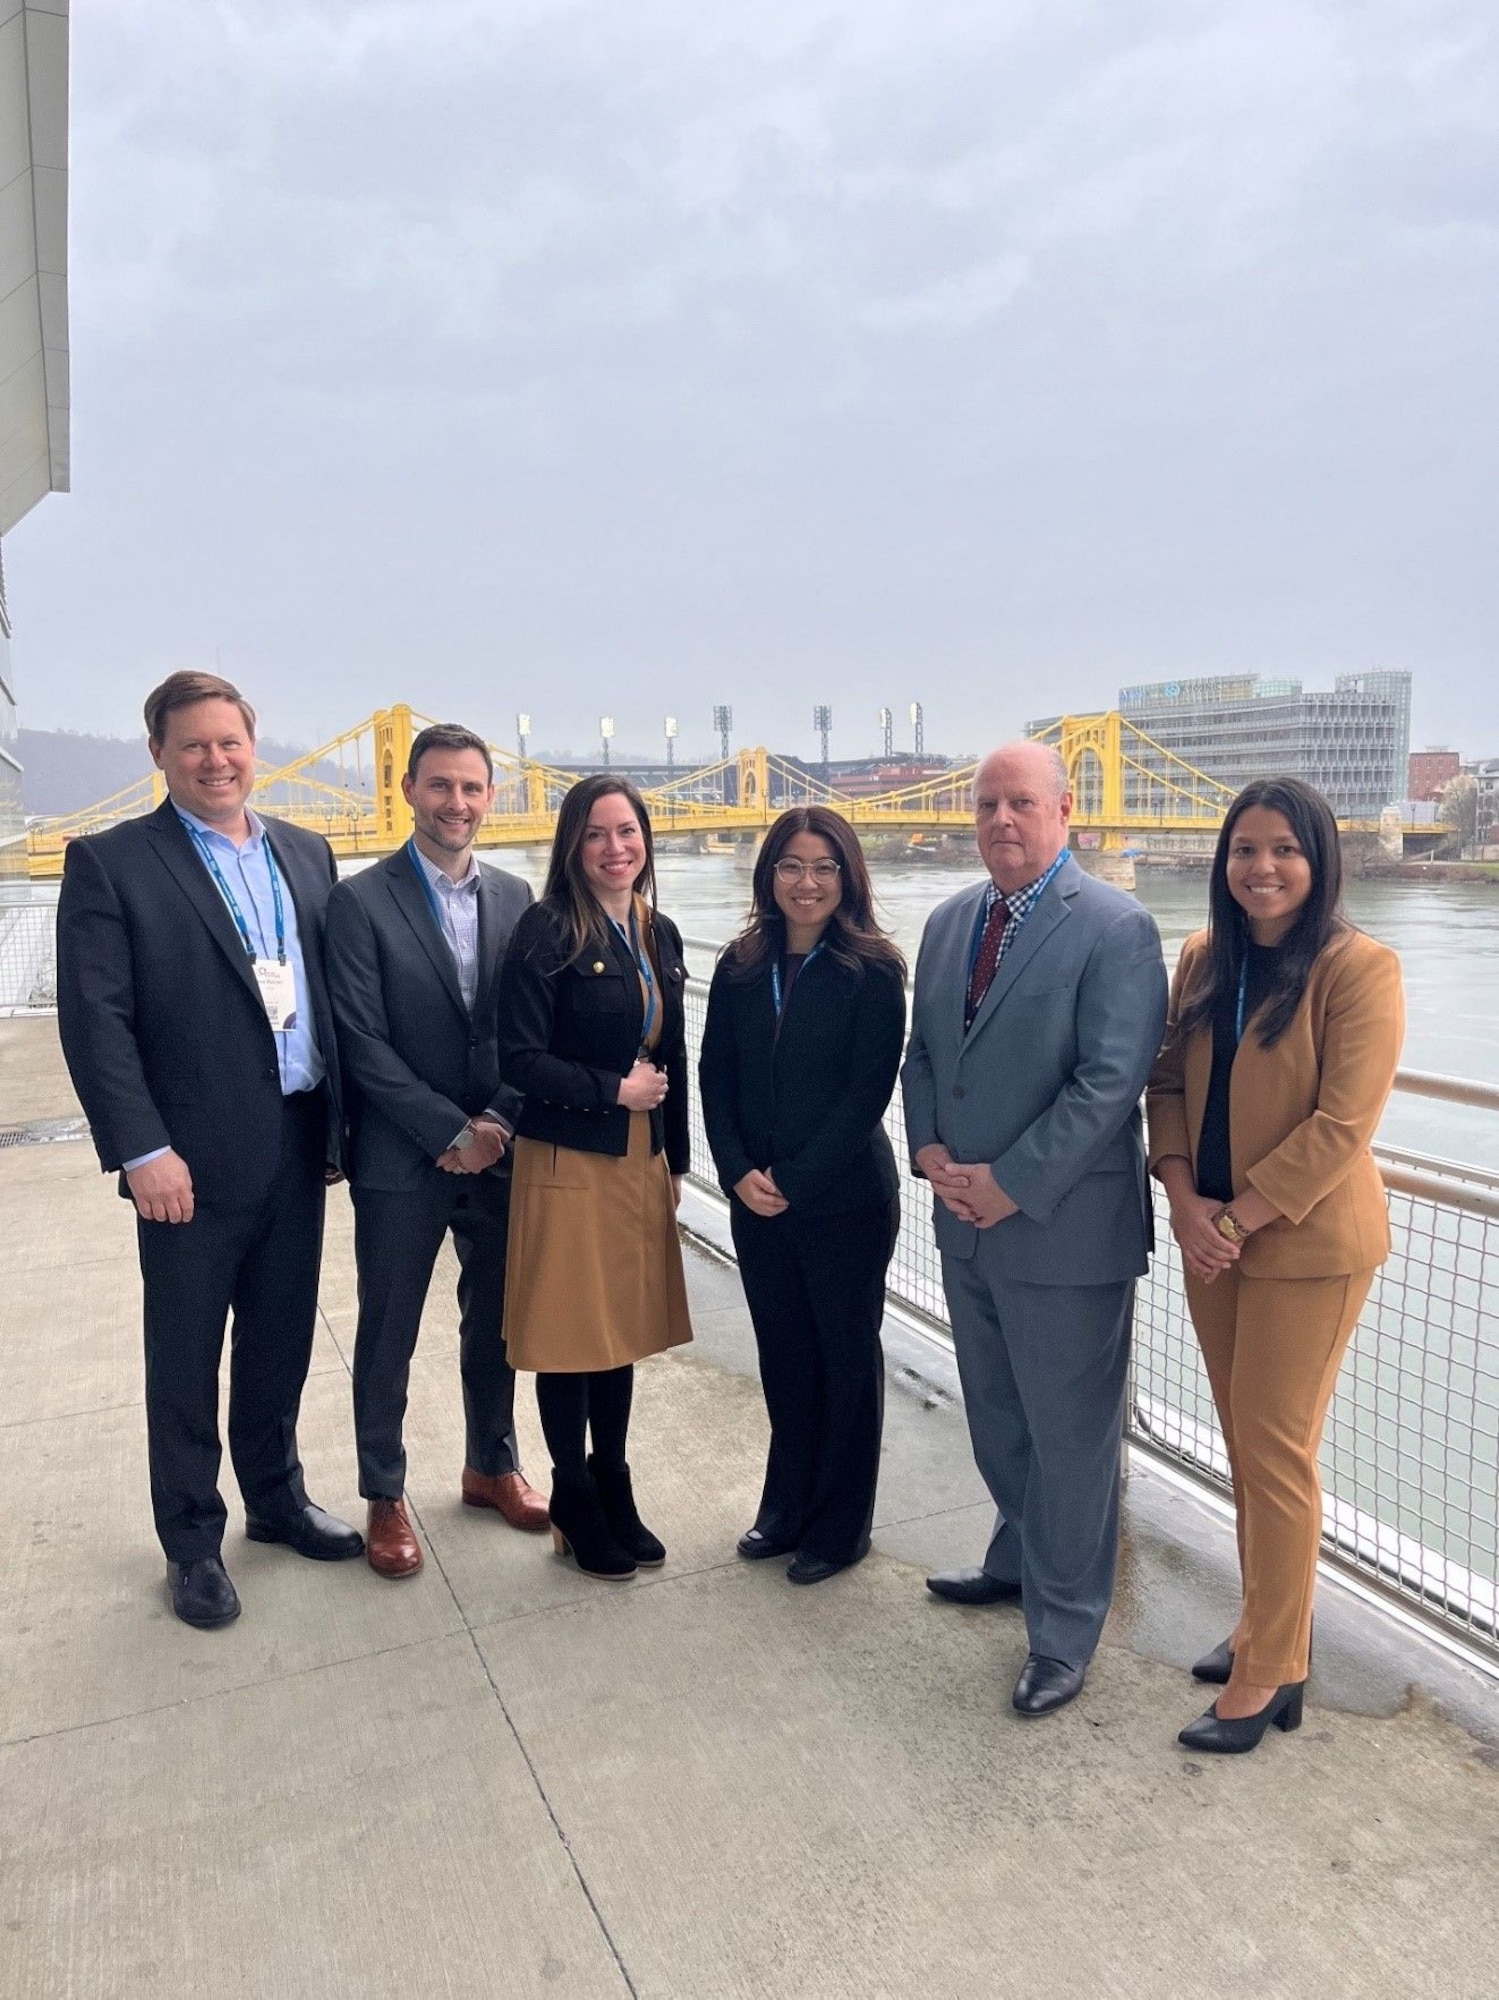 SAF/IEE and Via Science Inc. (VIA) celebrate eJARVIS achieving continuous Authority to Operate at 2024 Energy Exchange in Pittsburgh, PA. From Left to Right: Mr. Joe Babiec (VIA), Mr. Haden Snyder (VIA), Ms. Ashley Sadorra (SAF/IEE), Ms. Saaya Miyashiro (SAF/IEE), Mr. Douglas Tucker (SAF/IEE), and Ms. Seema Aziz (SAF/IEE).